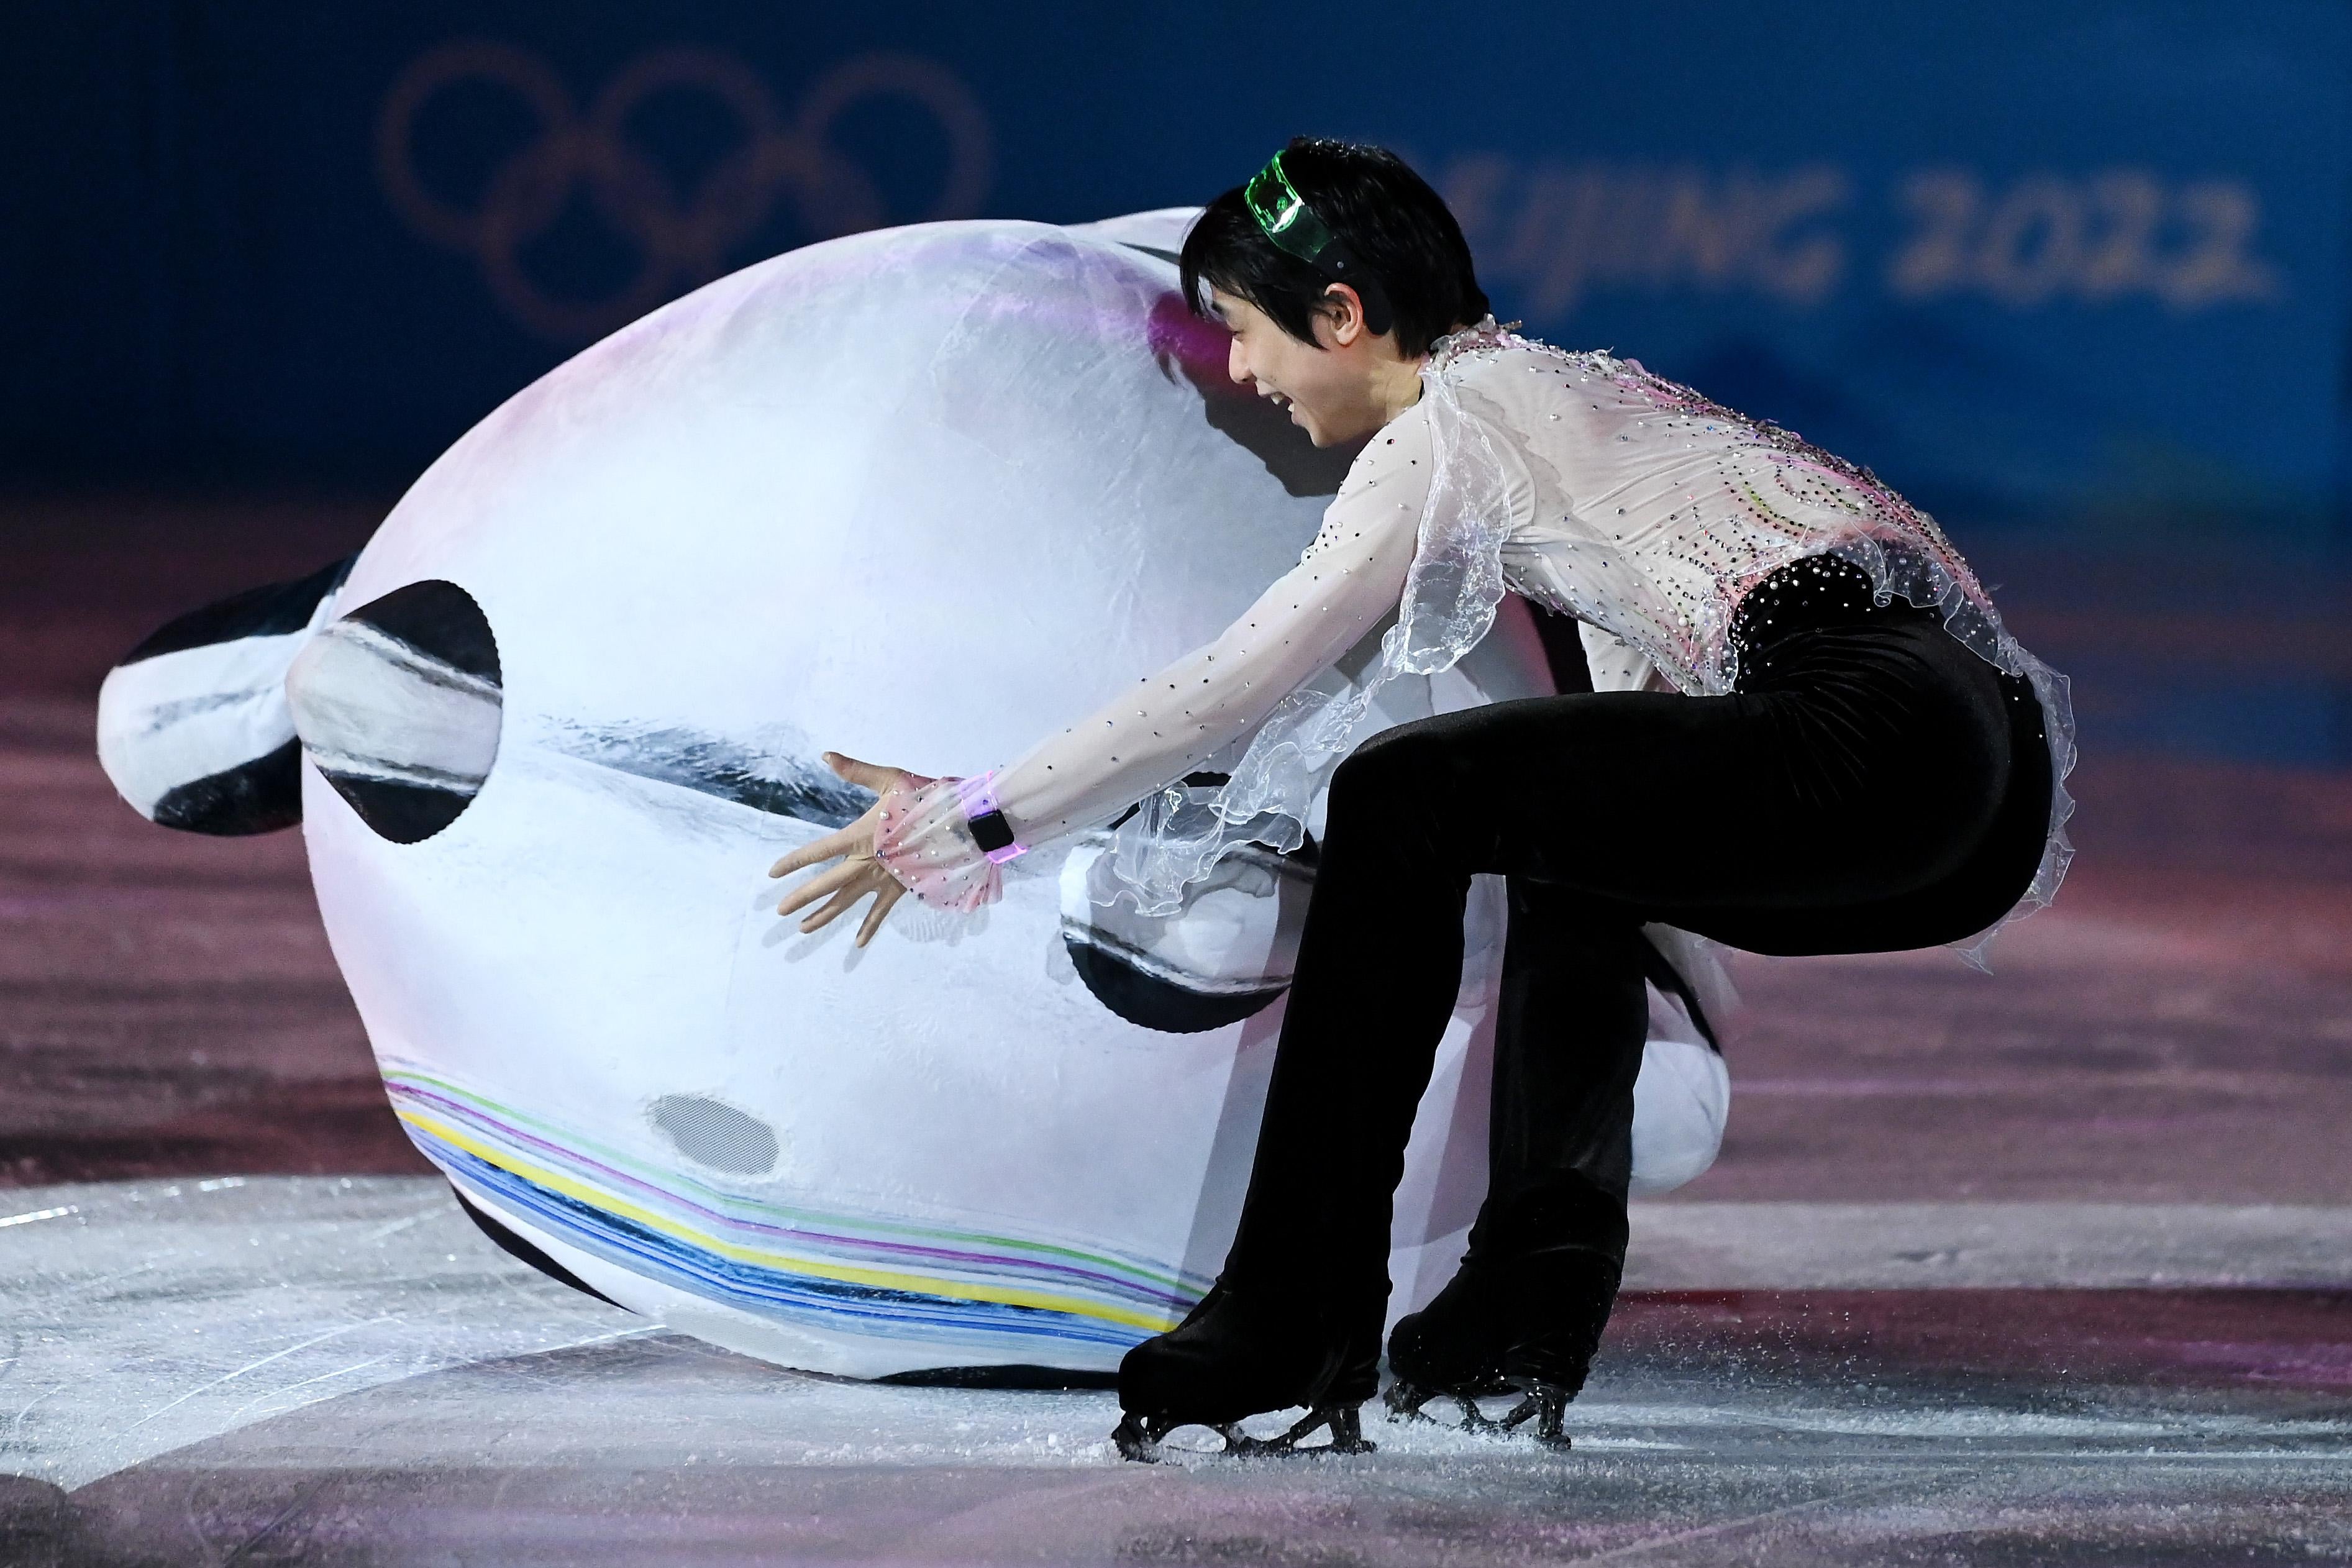 Bing Dwen Dwen face down on the ice, Hanyu crouching with his arms around him and trying to help him up.